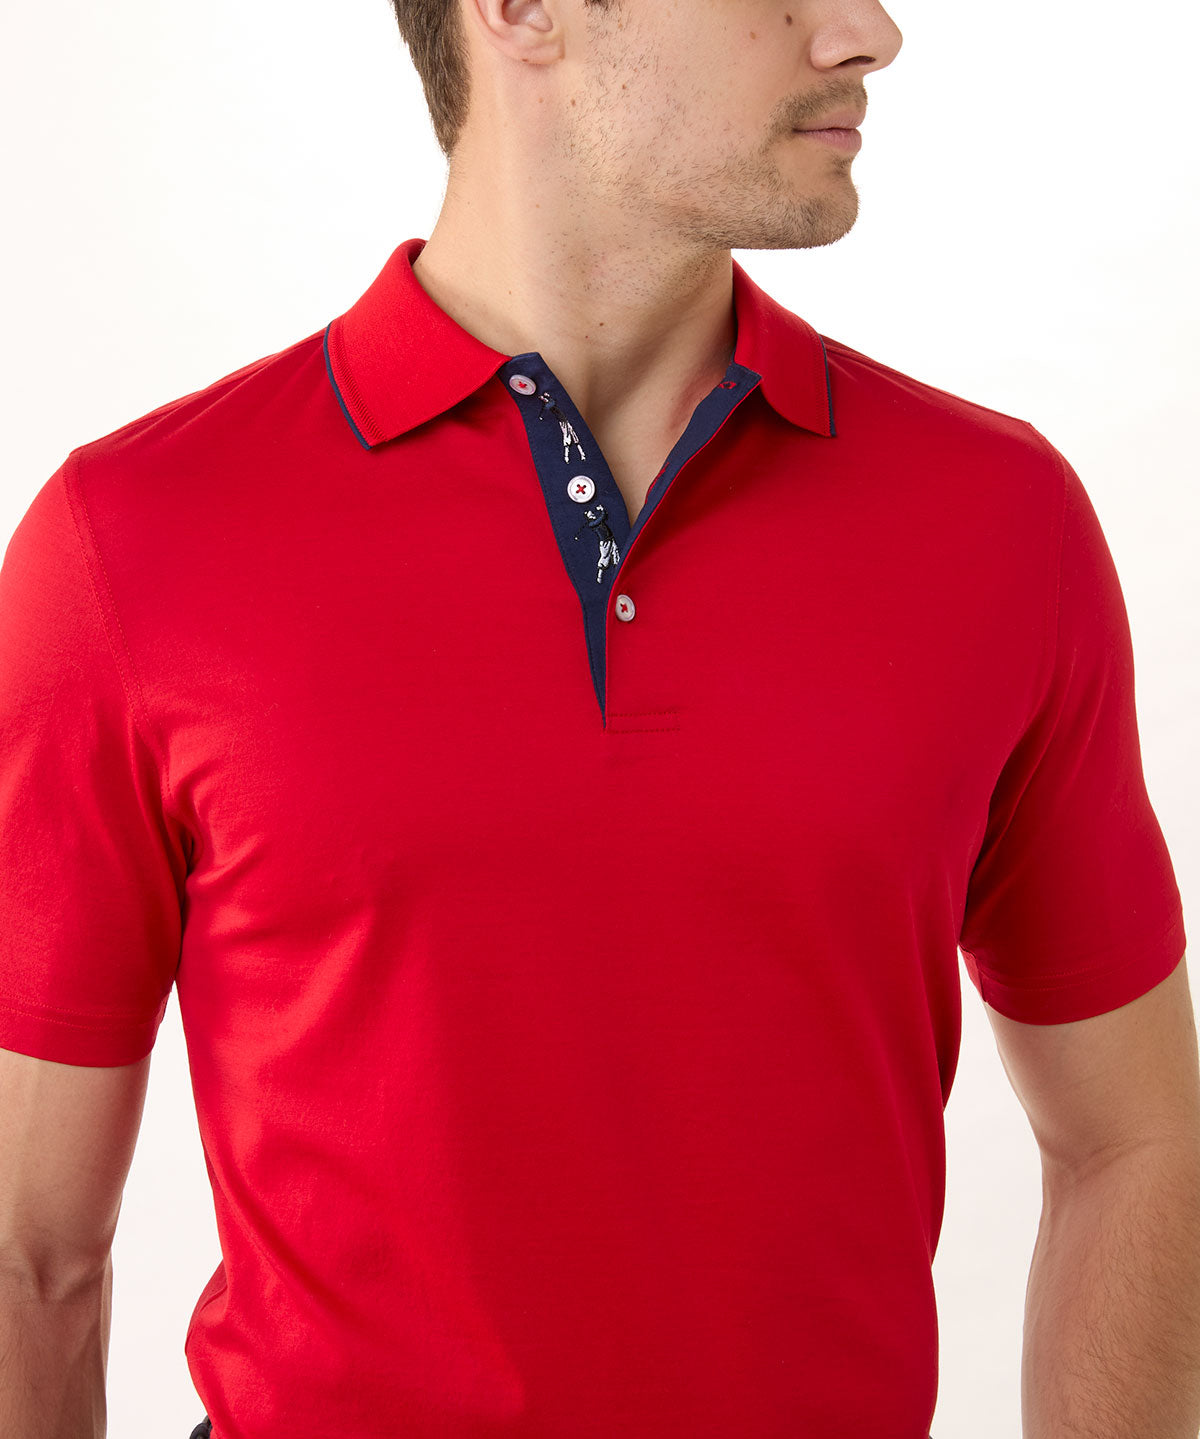 Signature 100% Mercerized Cotton Solid Polo Shirt with Tipping